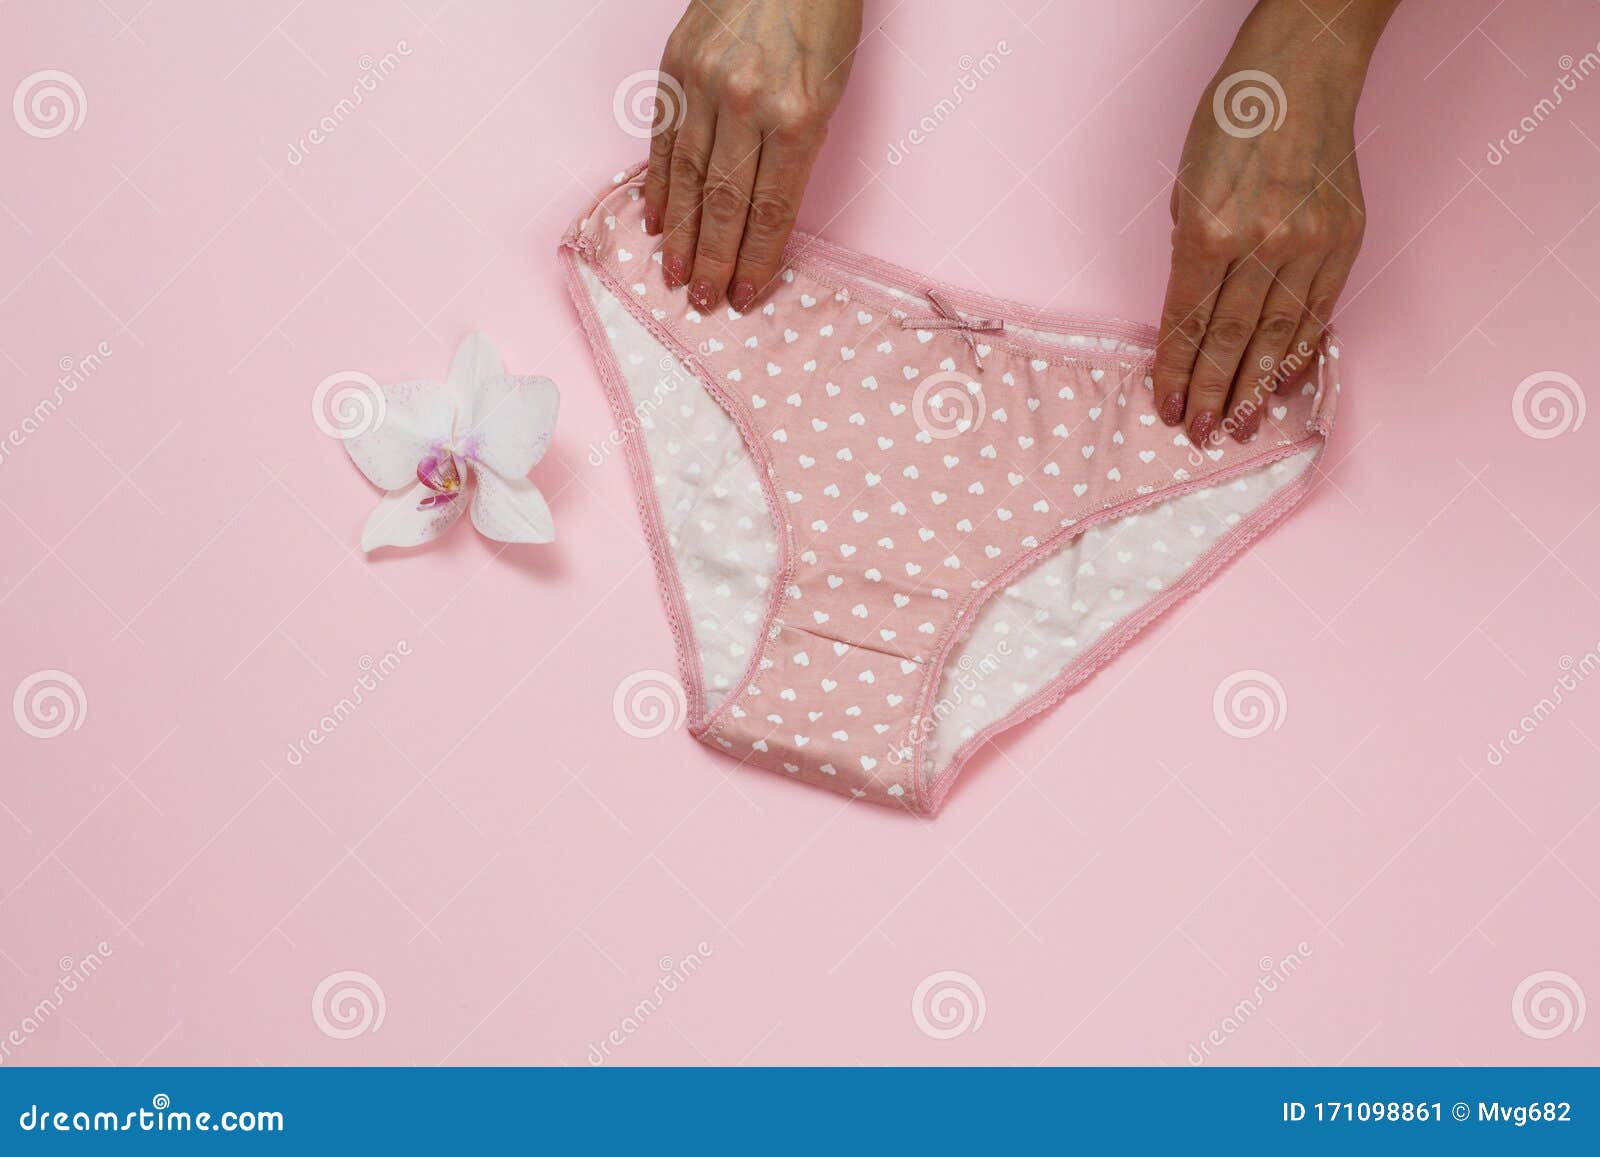 Women`s Hands with Beautiful Panties on Pink Background Stock Image ...